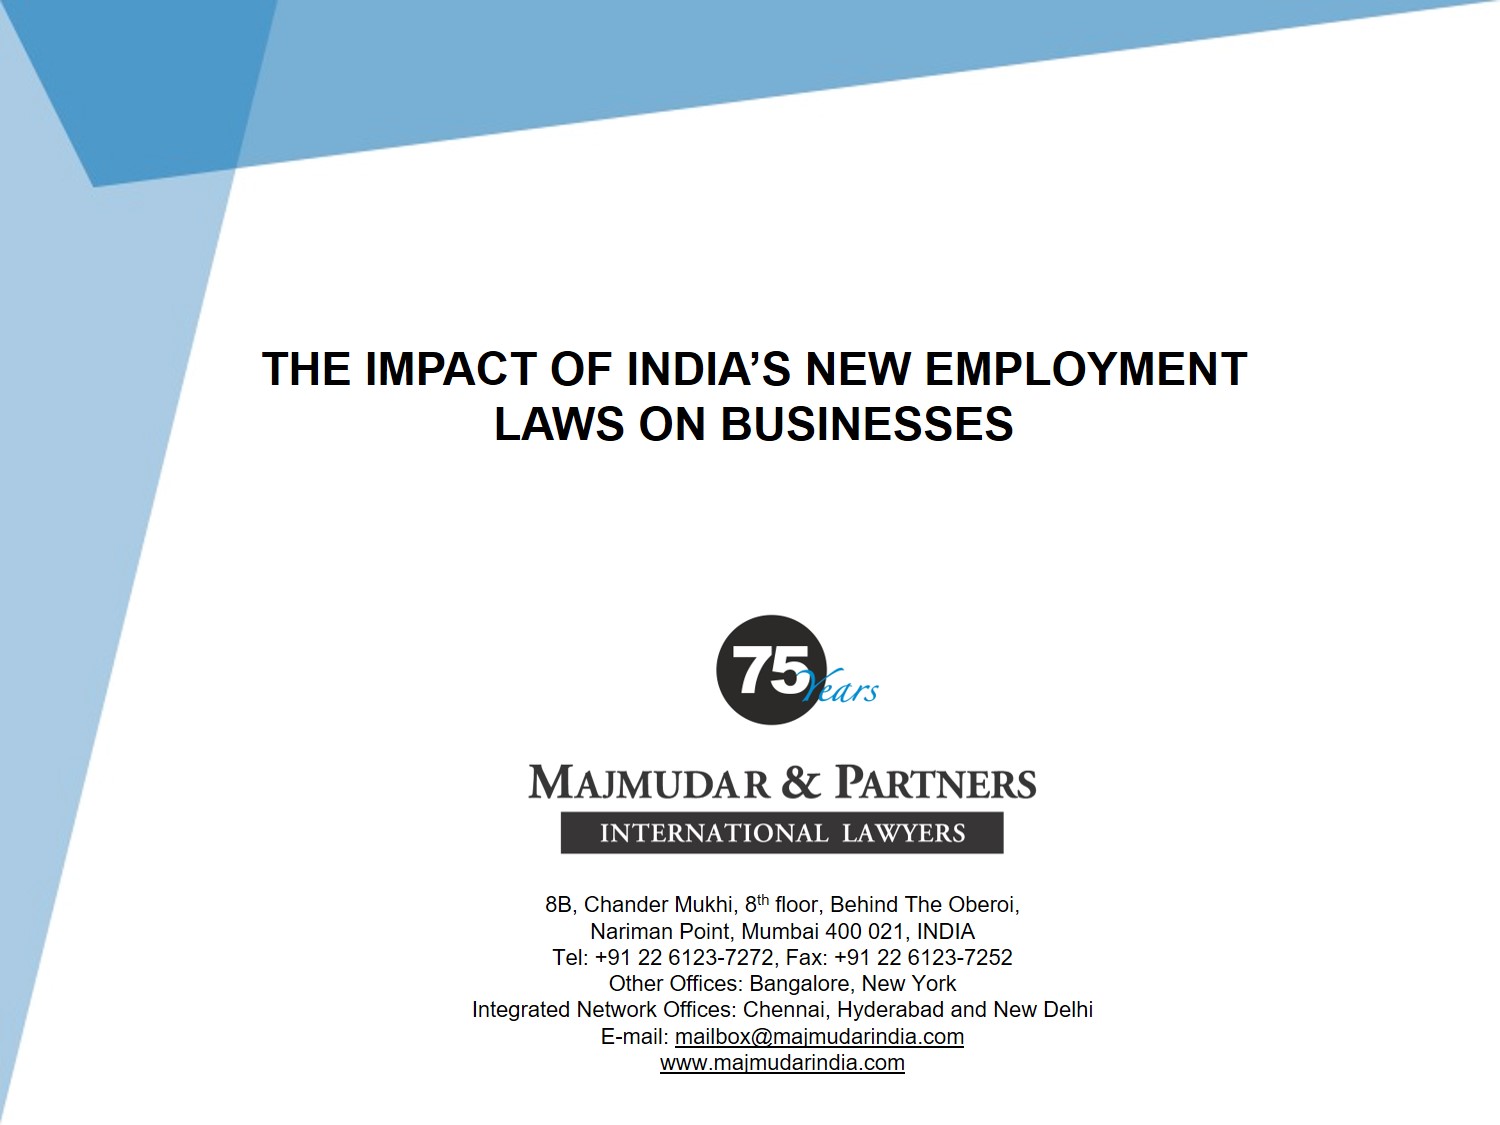 Impact of new employment laws on business